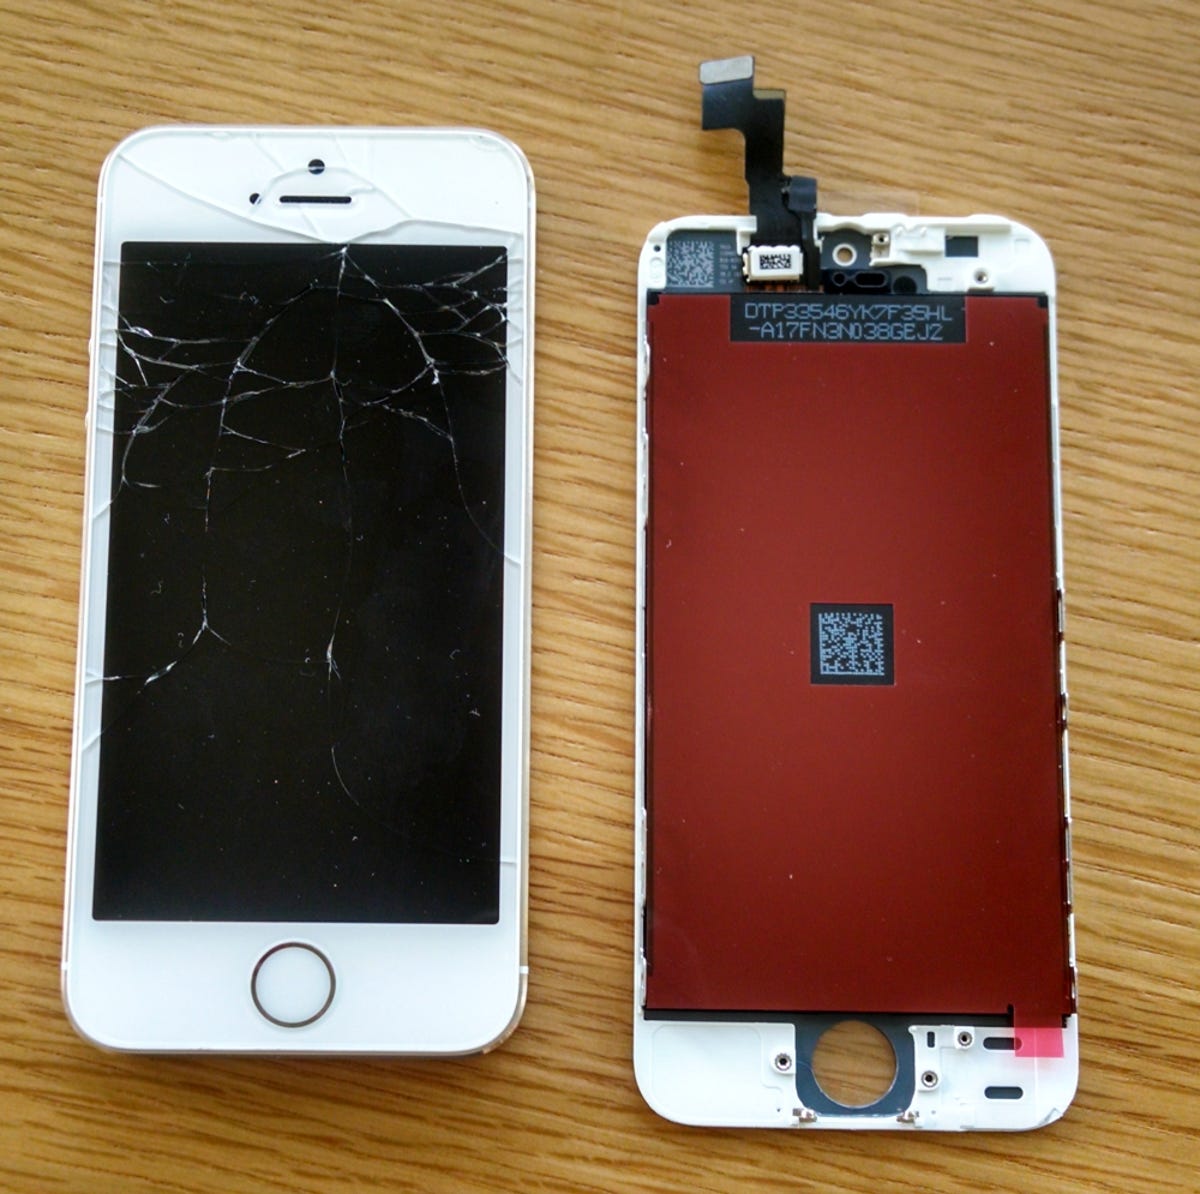 Can An Ordinary Joe Replace A Busted Iphone Screen Cnet